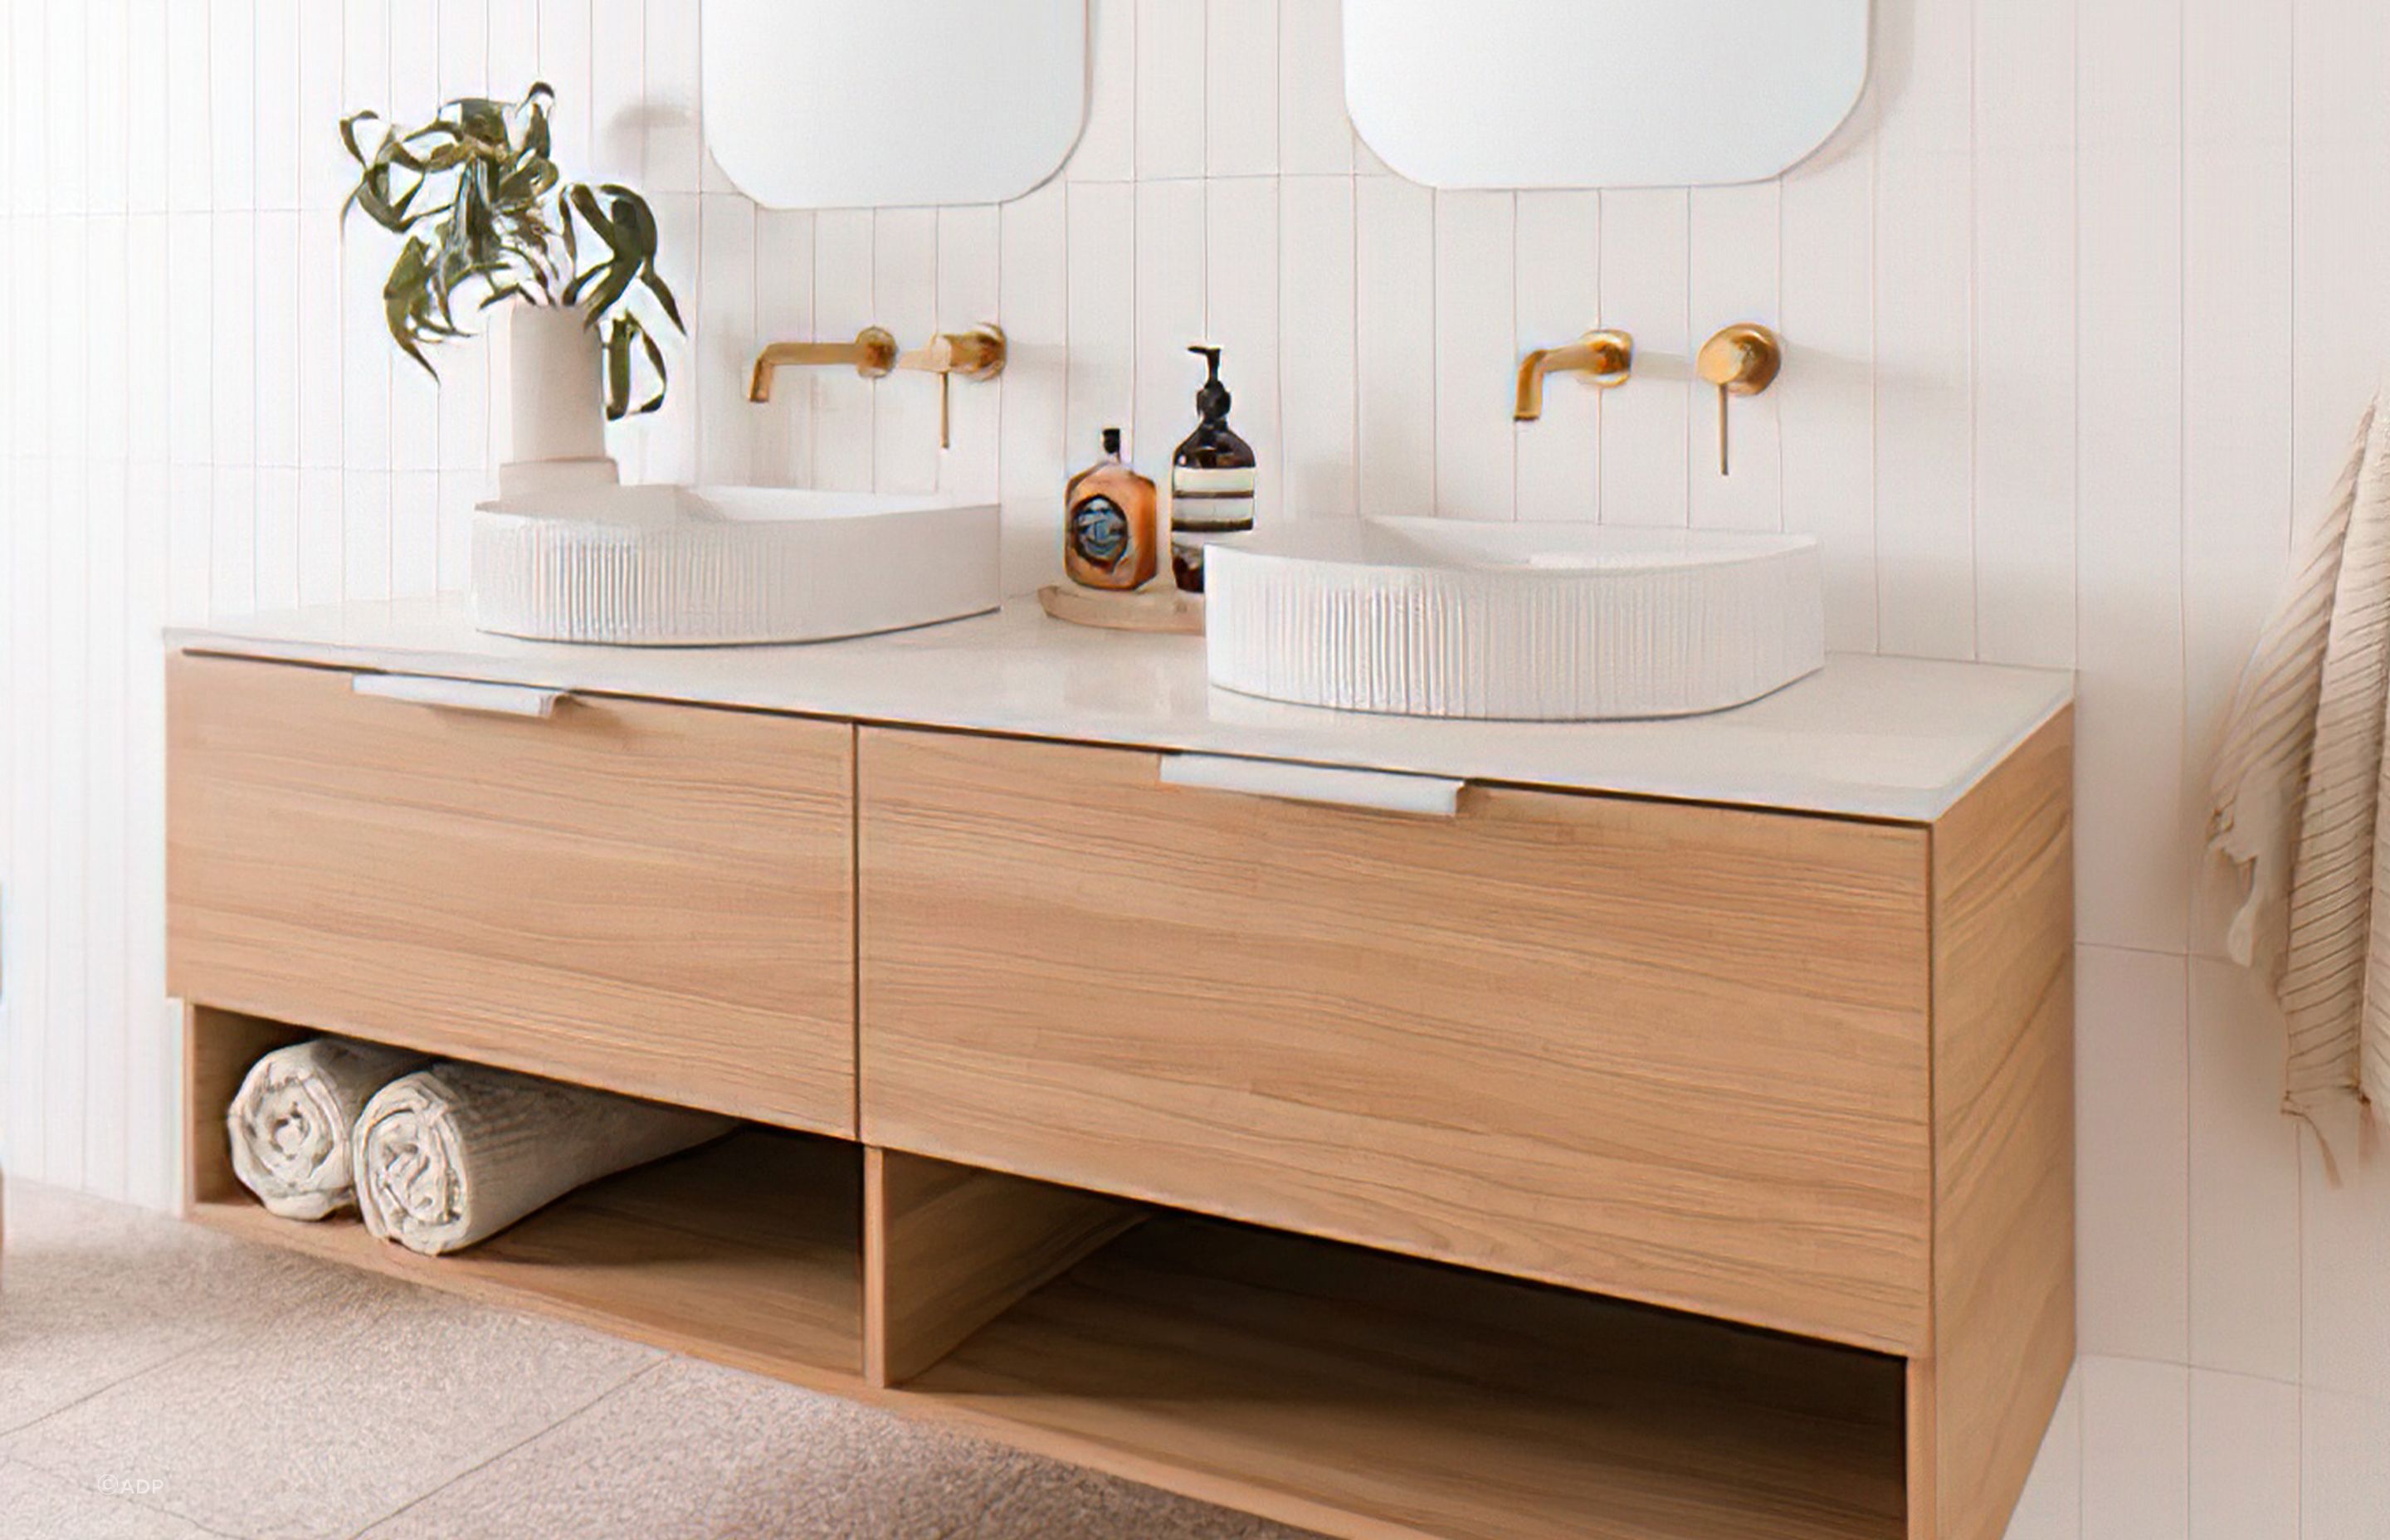 Double vanity options like the Glacier Full Depth Shelf Vanity offer twice the space and twice the fun